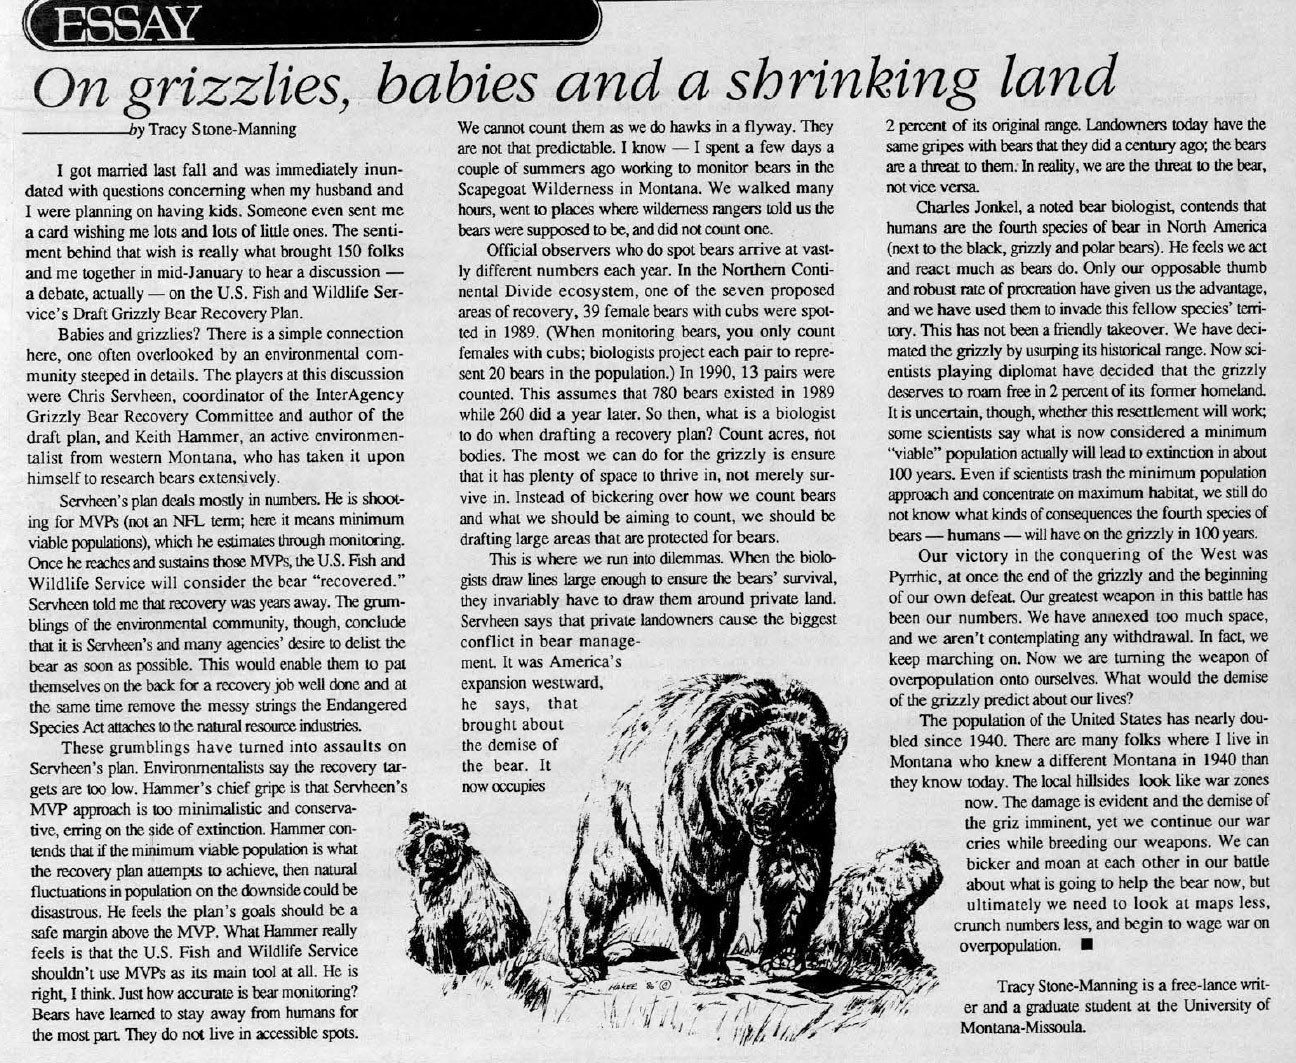 "On grizzlies, babies and a shrinking land" by Tracy Stone-Manning. (High Country News)